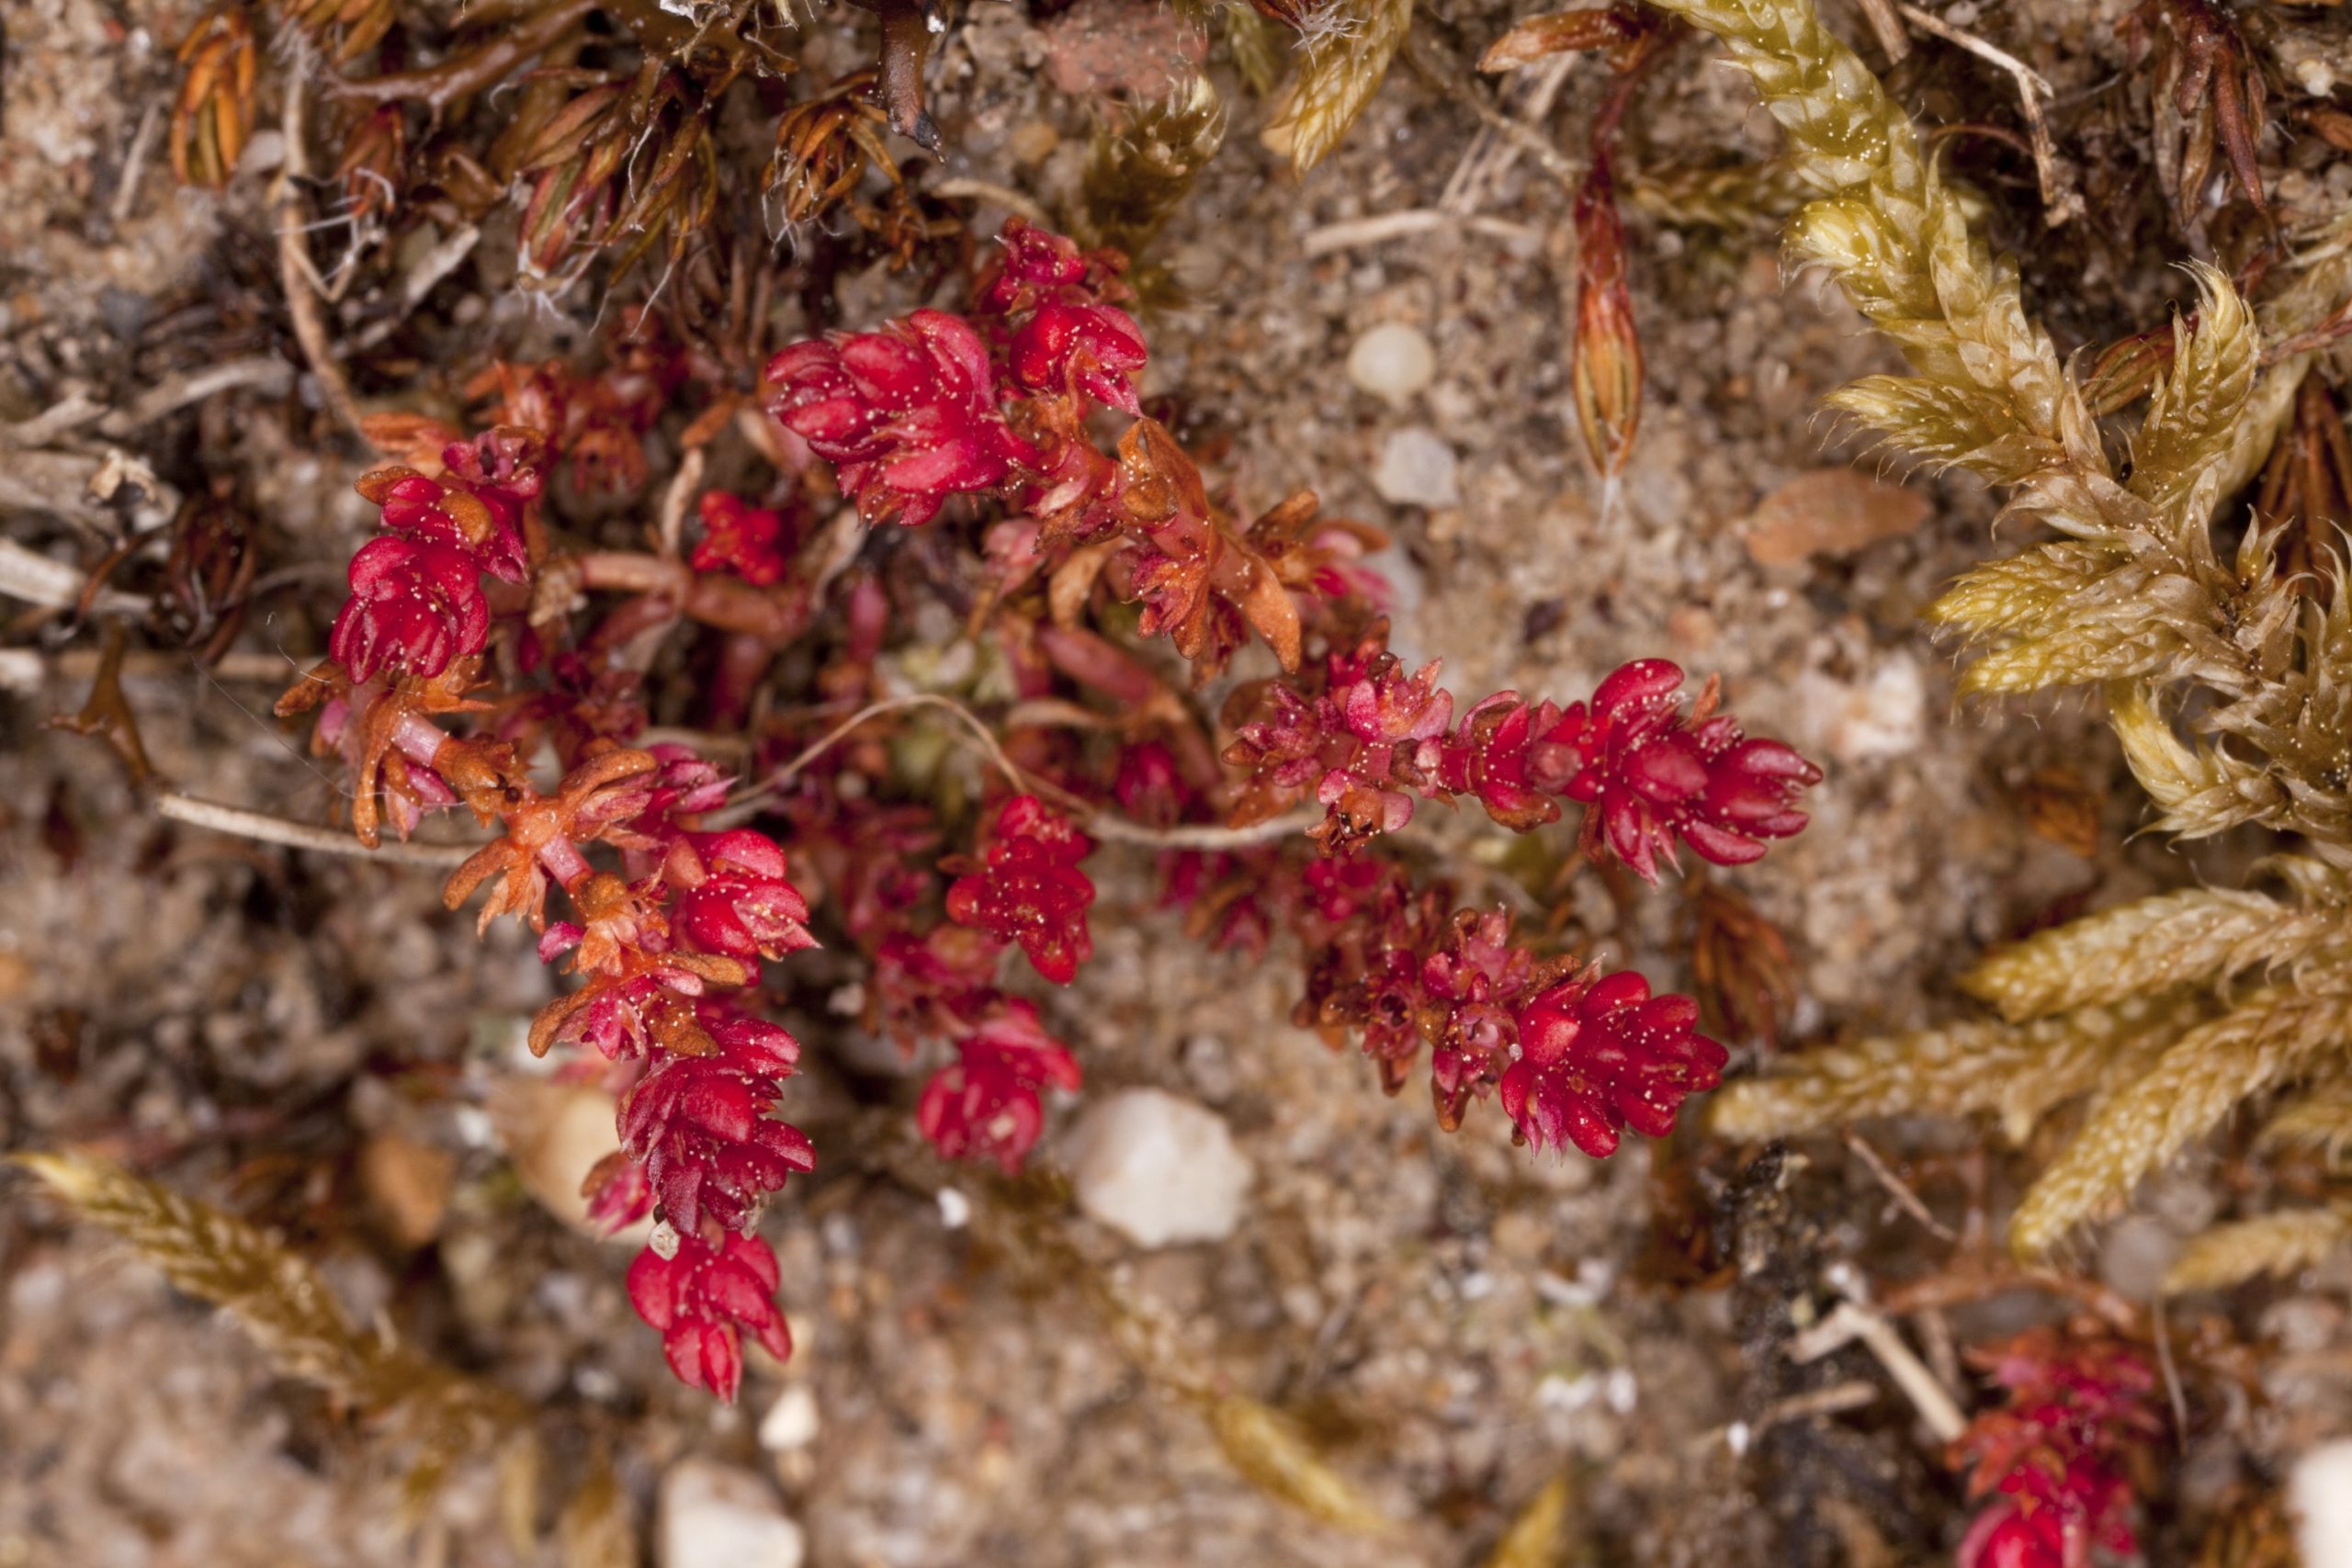 Mossy stonecrop: The succulent is spreading to sandy habitats in Scotland.